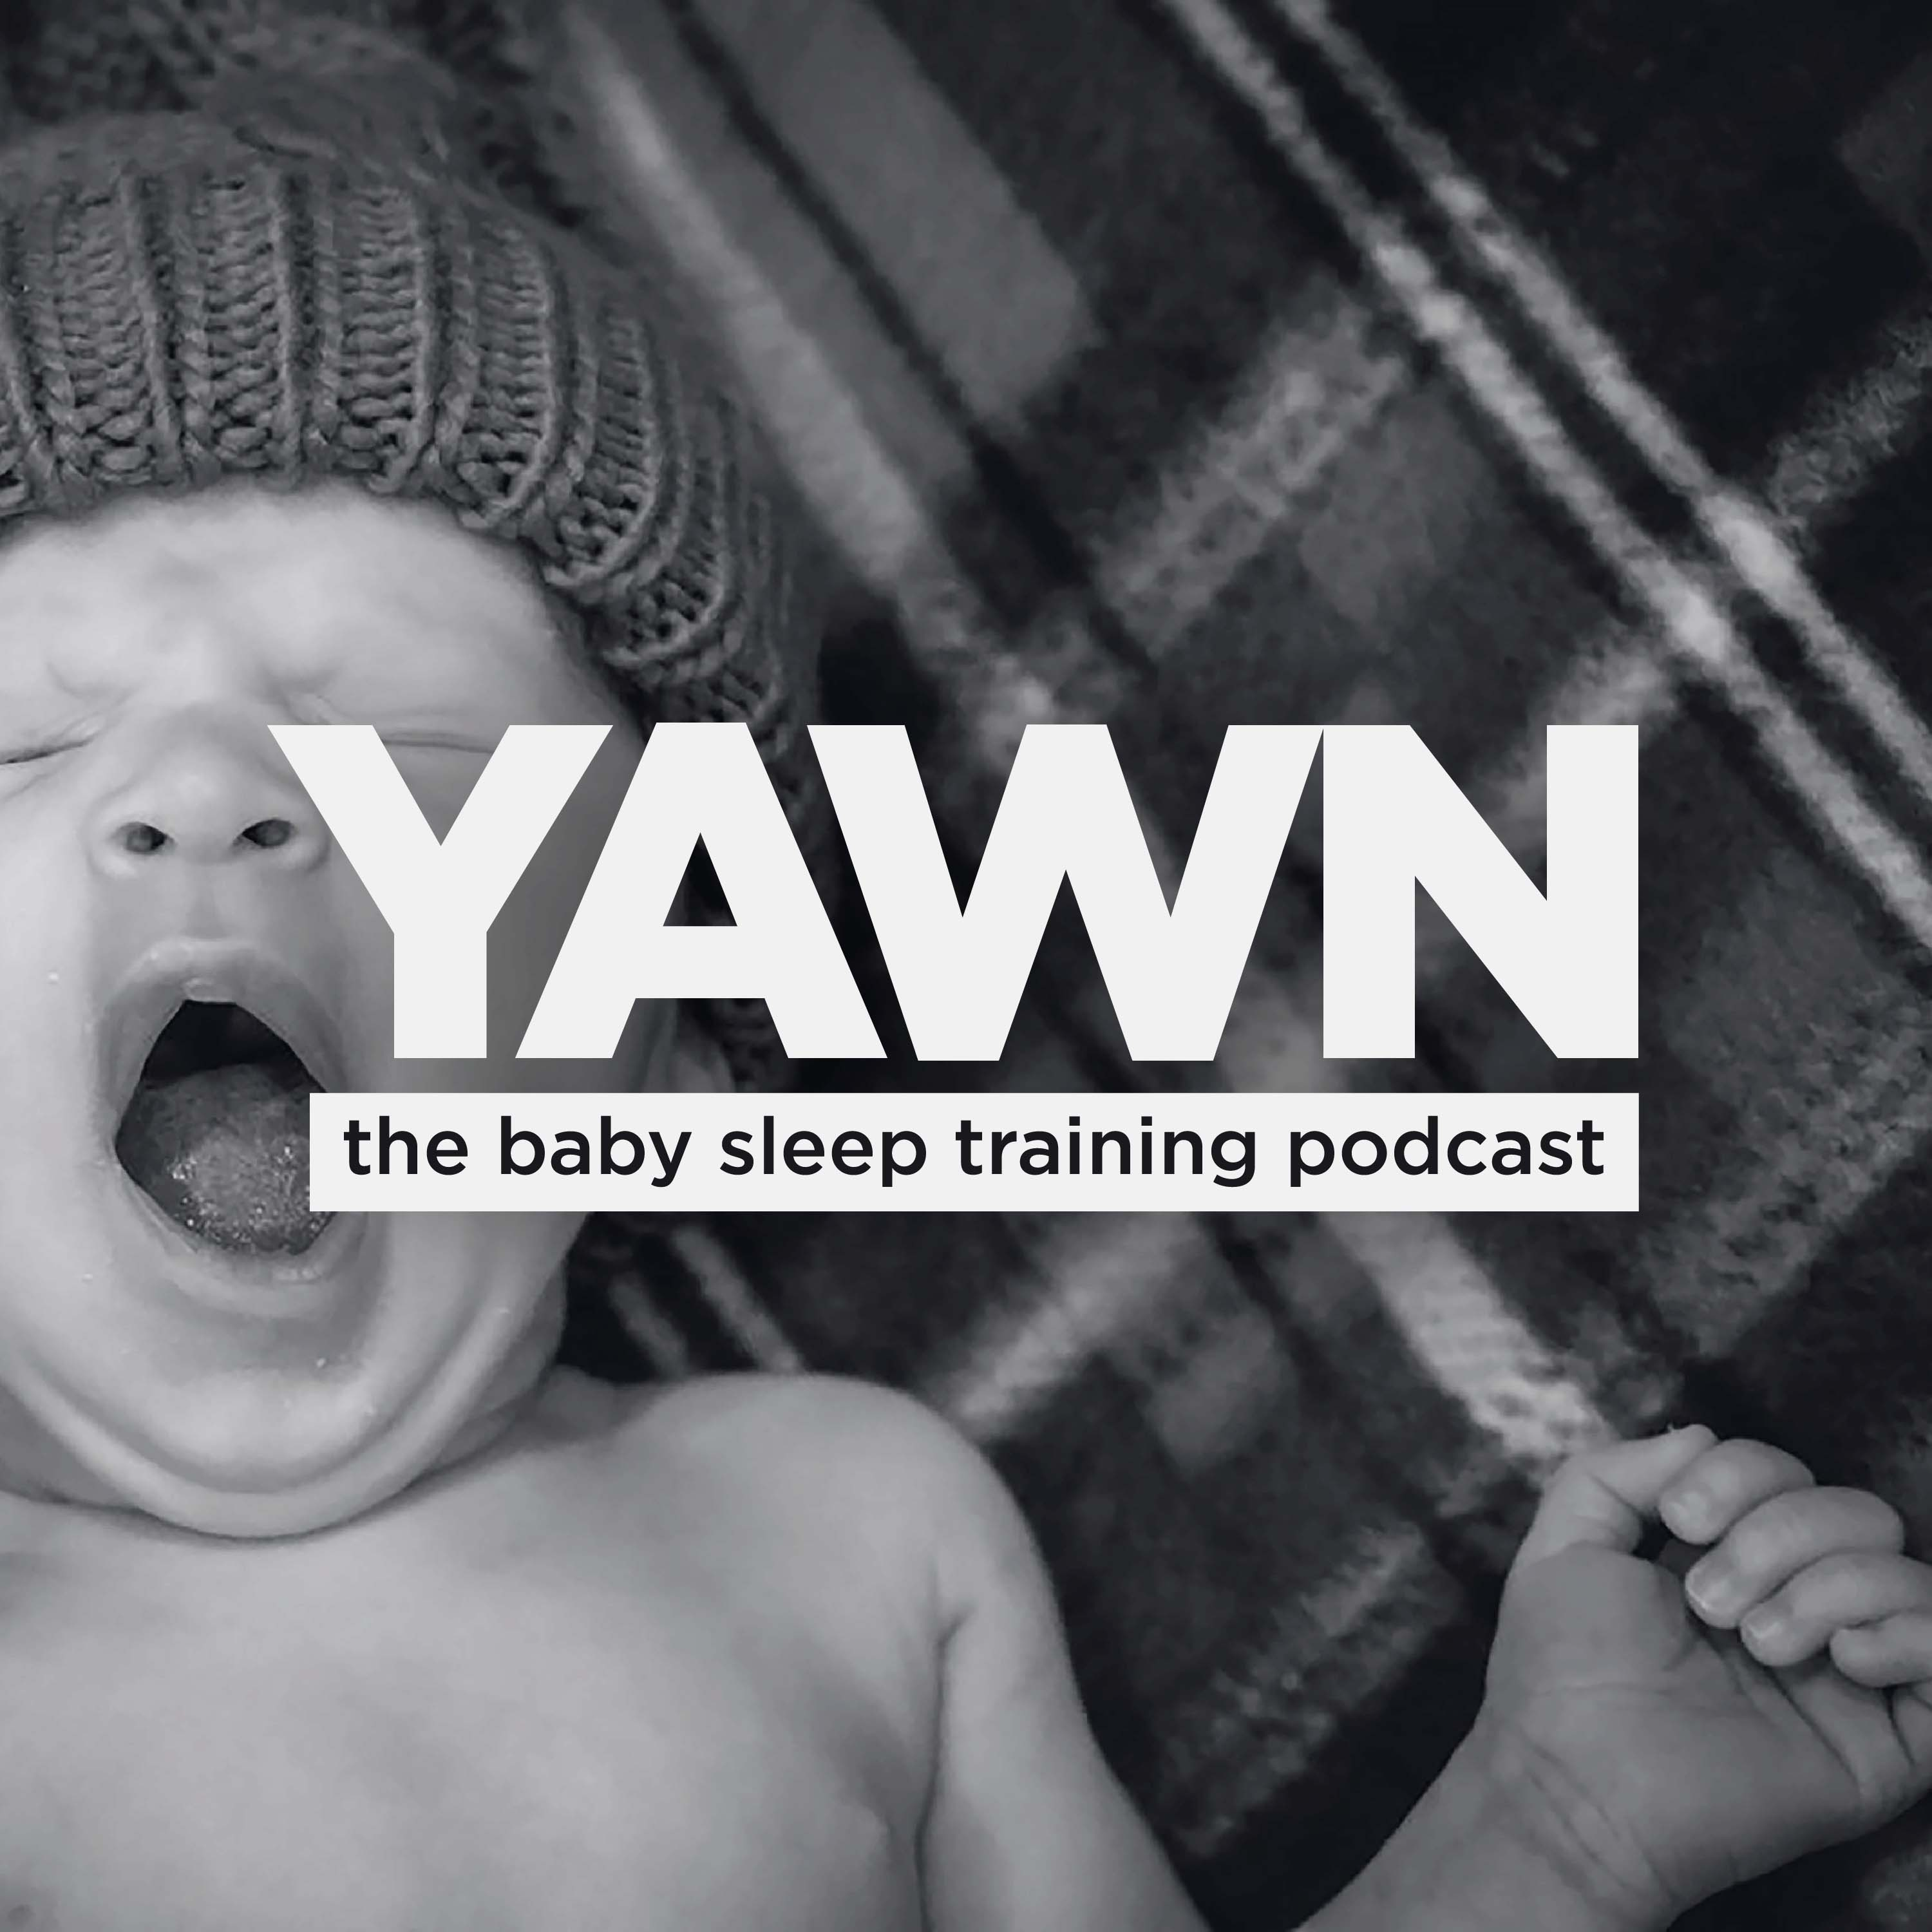 Does a yawn mean your baby is tired? [focus: sleep cues]